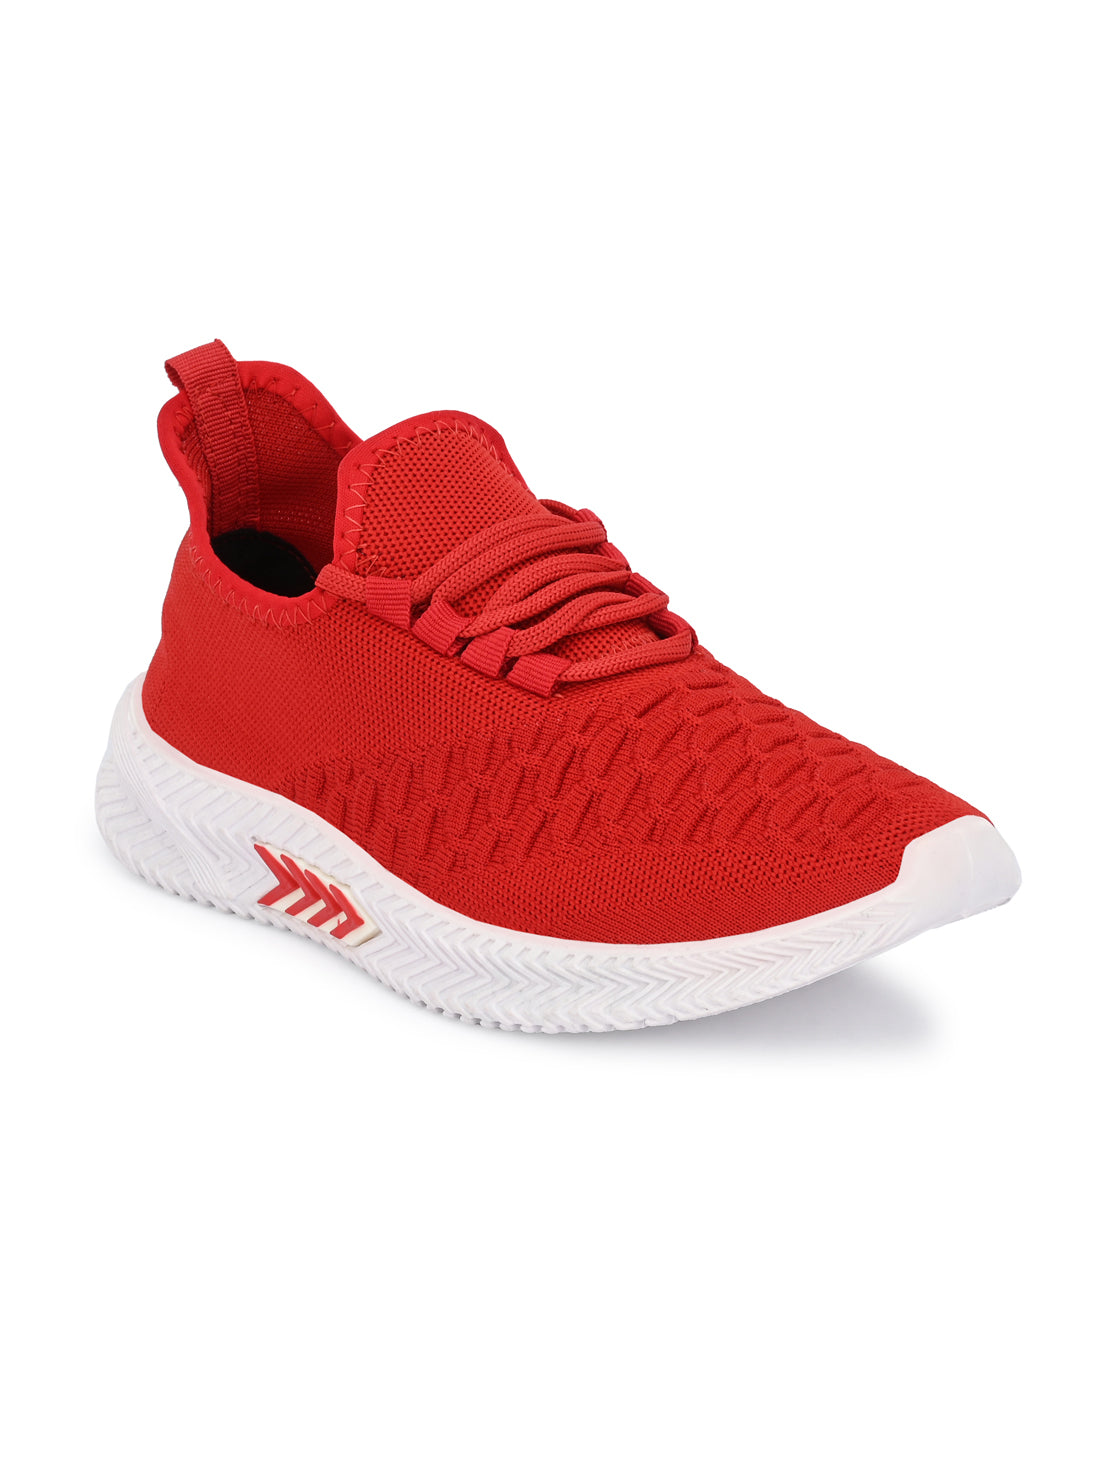 Hirolas® Men's Red Knitted Running/Walking/Gym Lace Up Sneaker Sport Shoes (HRL2040RED)